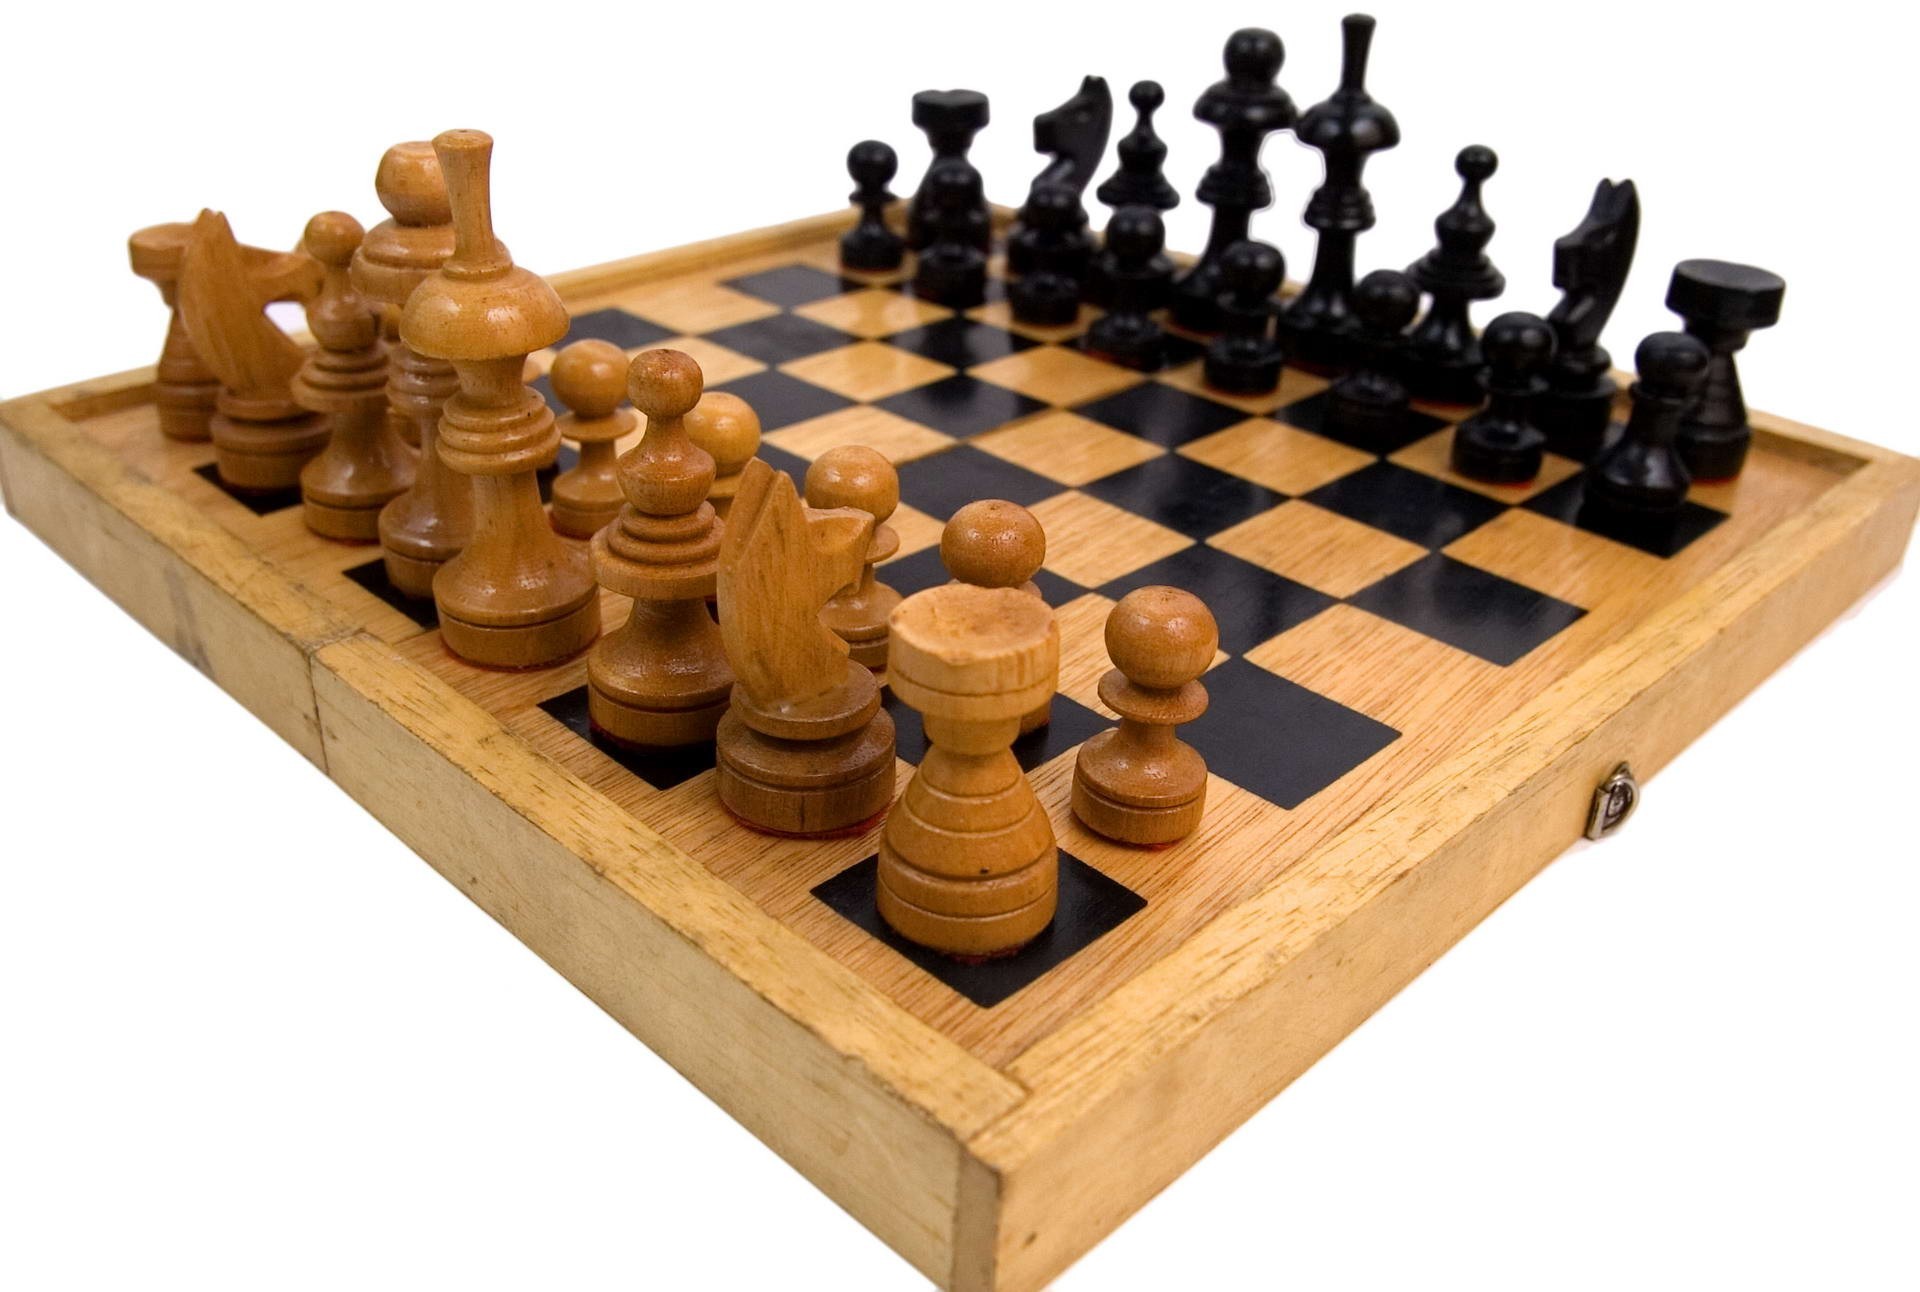 board games chess strategy pawn knight queen competition combat mate game victory challenge castle board game win war travel piece leisure strategic intelligence